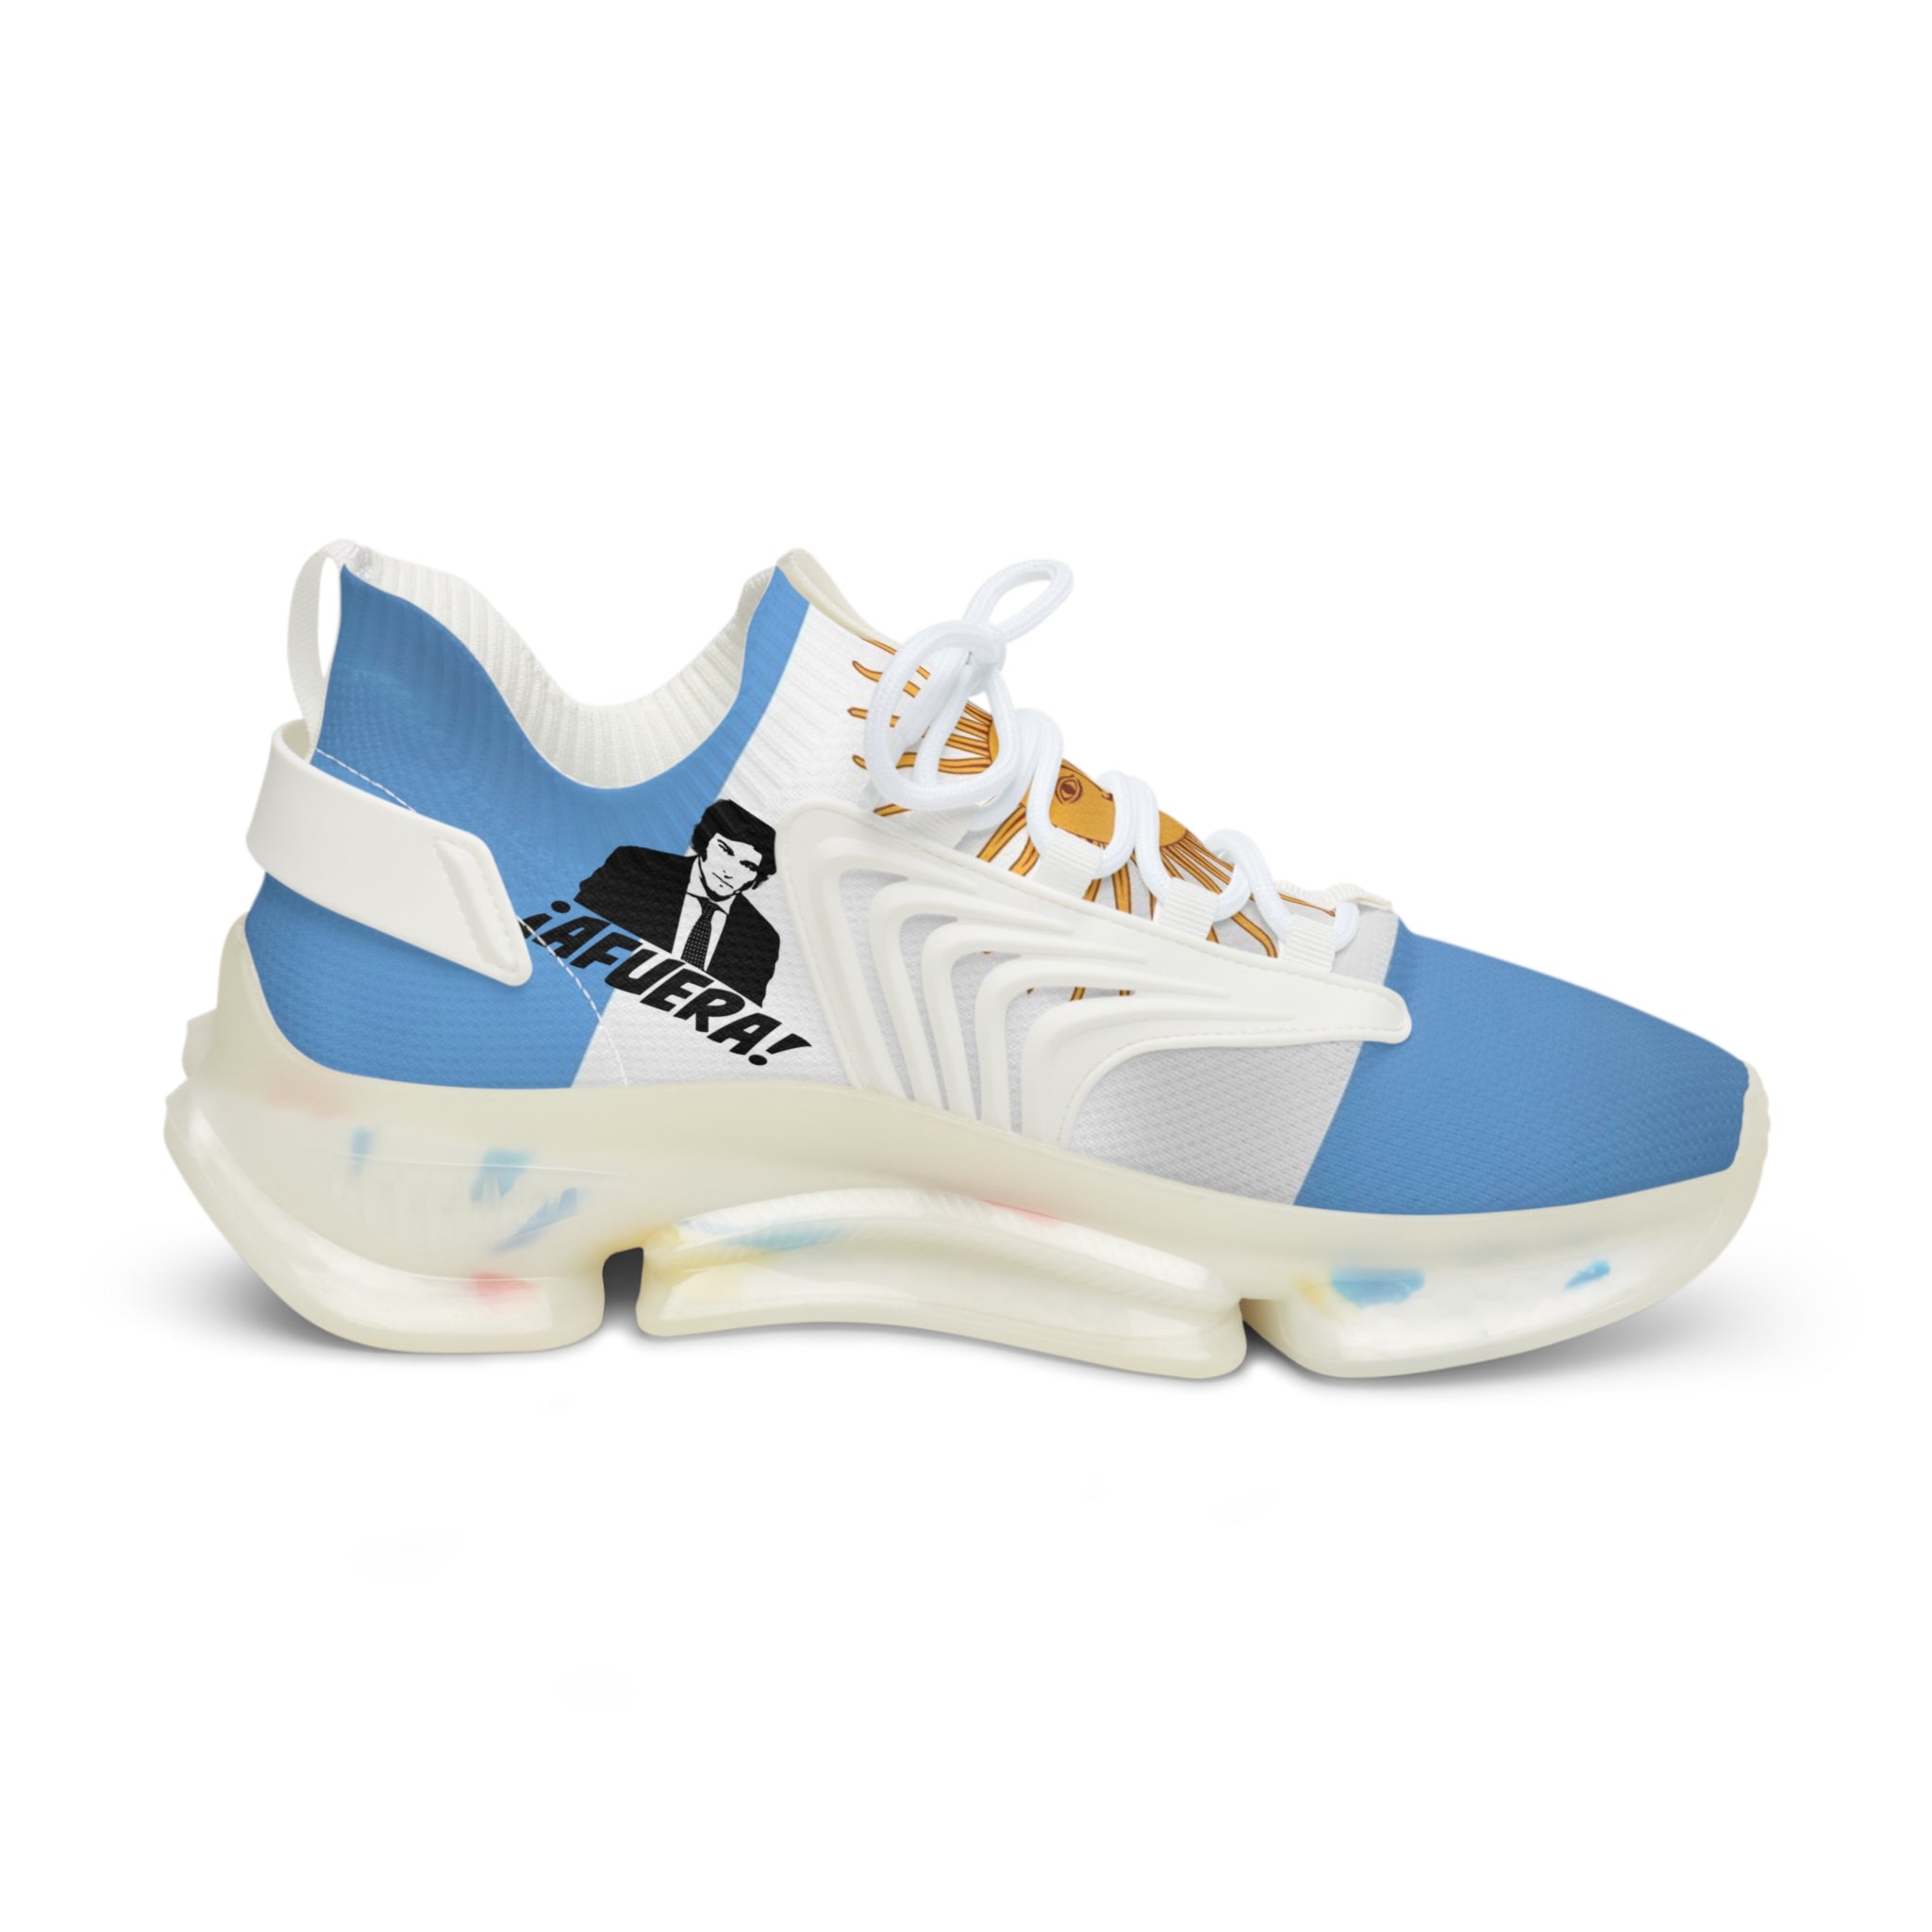 Javier Milei AFUERA Sneakers - Argentina Shipping Friendly | $30 OFF UNTIL MIDNIGHT